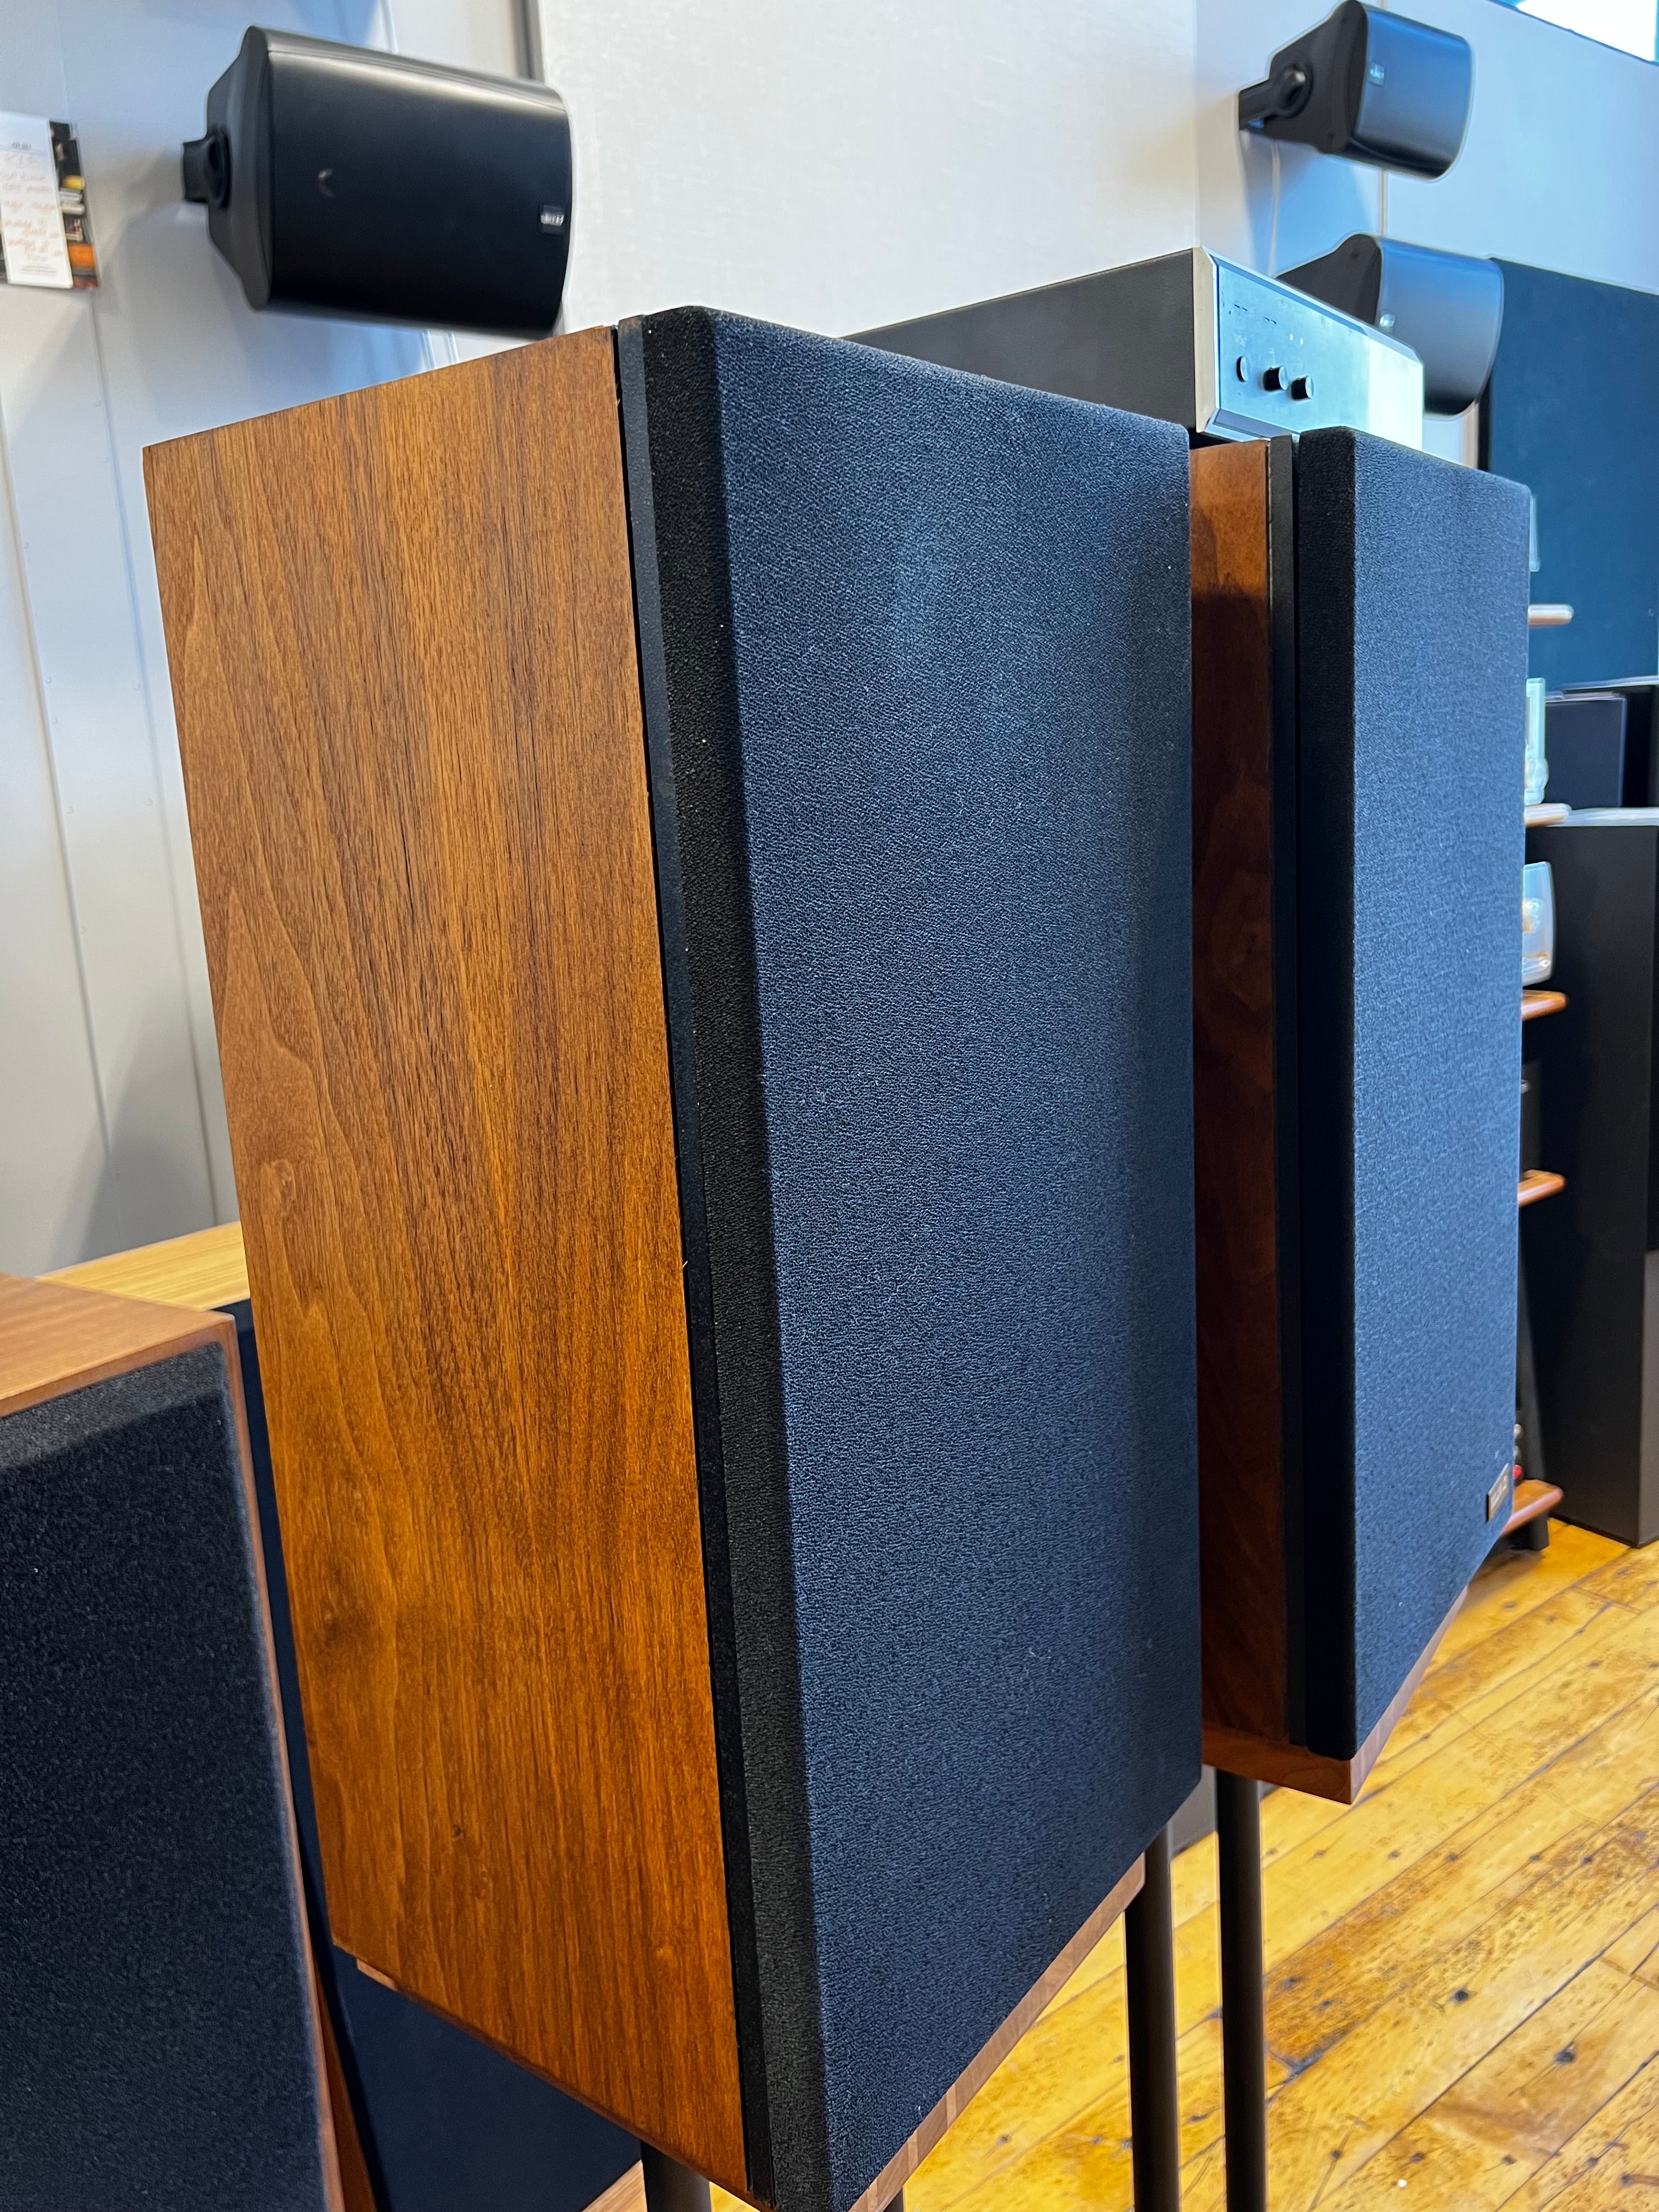 KLH 2, 3-way Loudspeakers with Analog Bass Controller